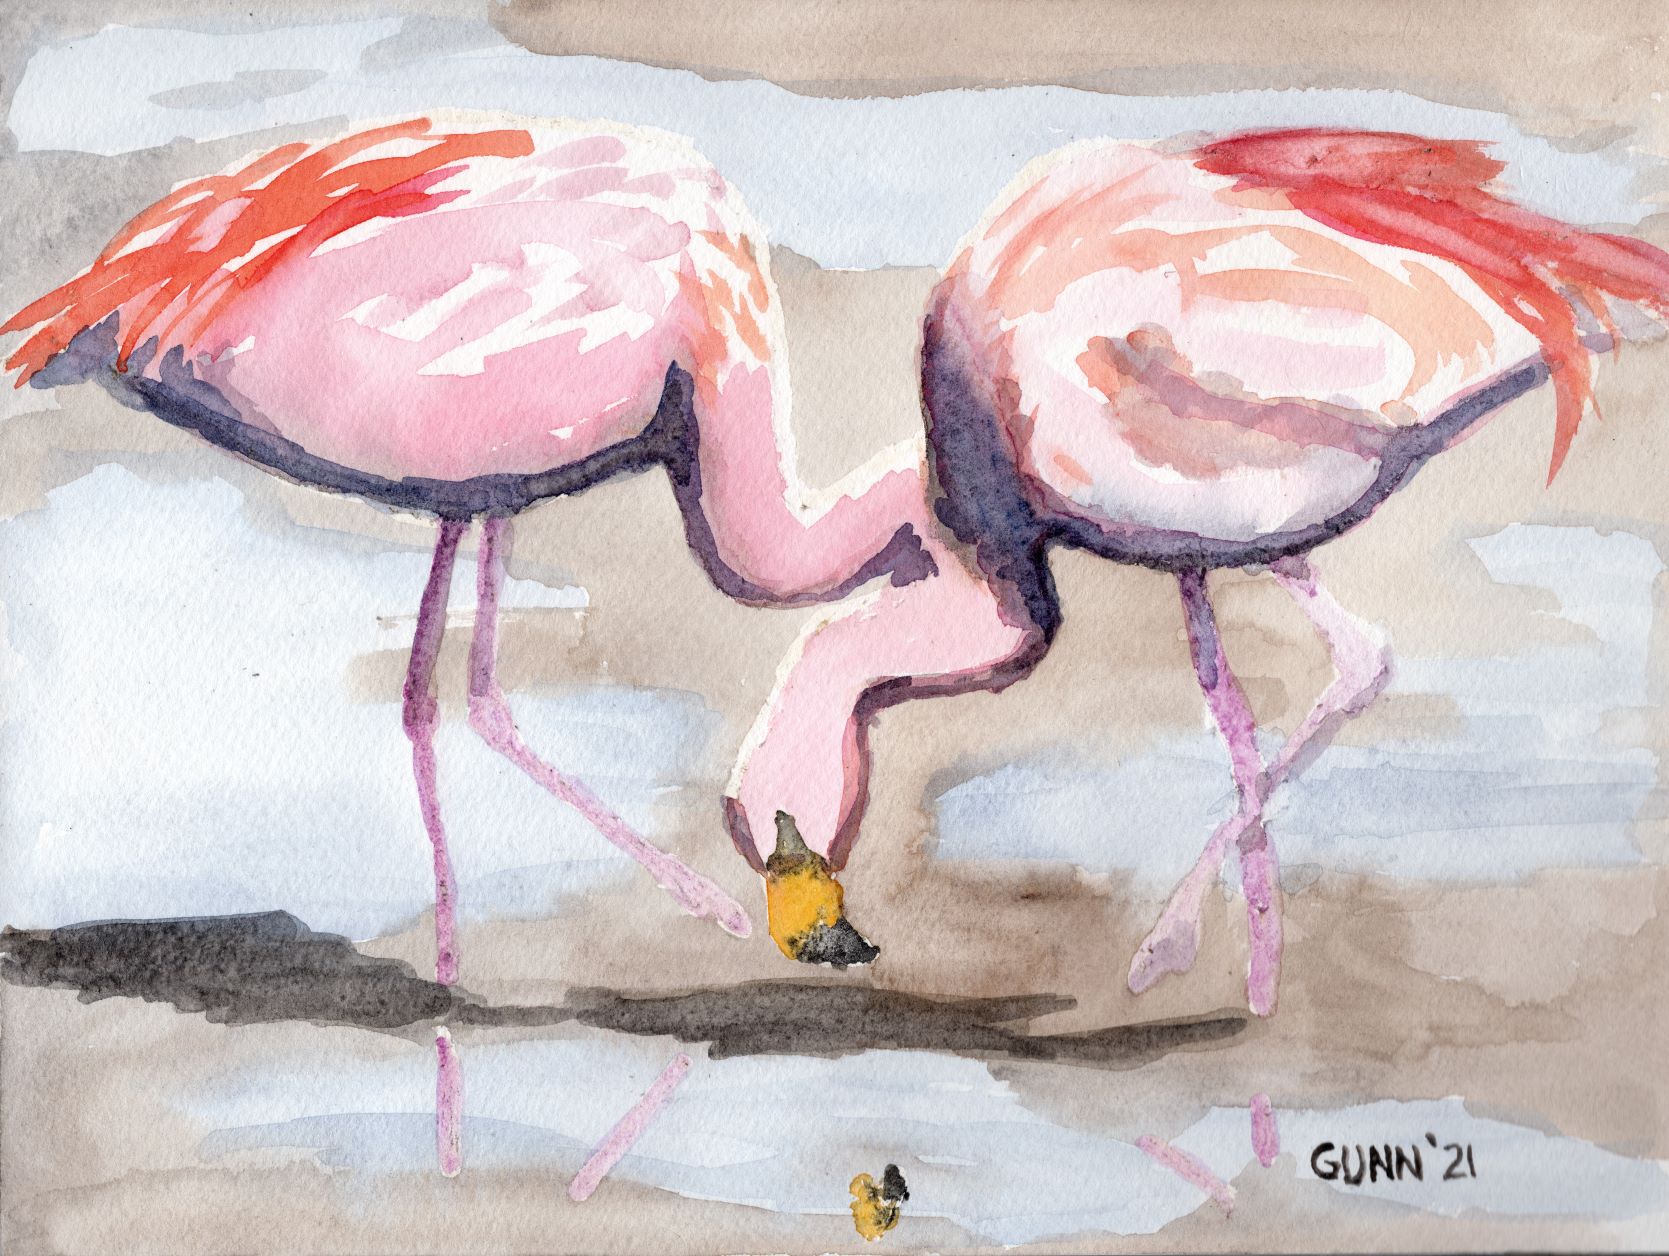 Impressionist Flamingoes, was intended to be called Beachcombing Flamingoes